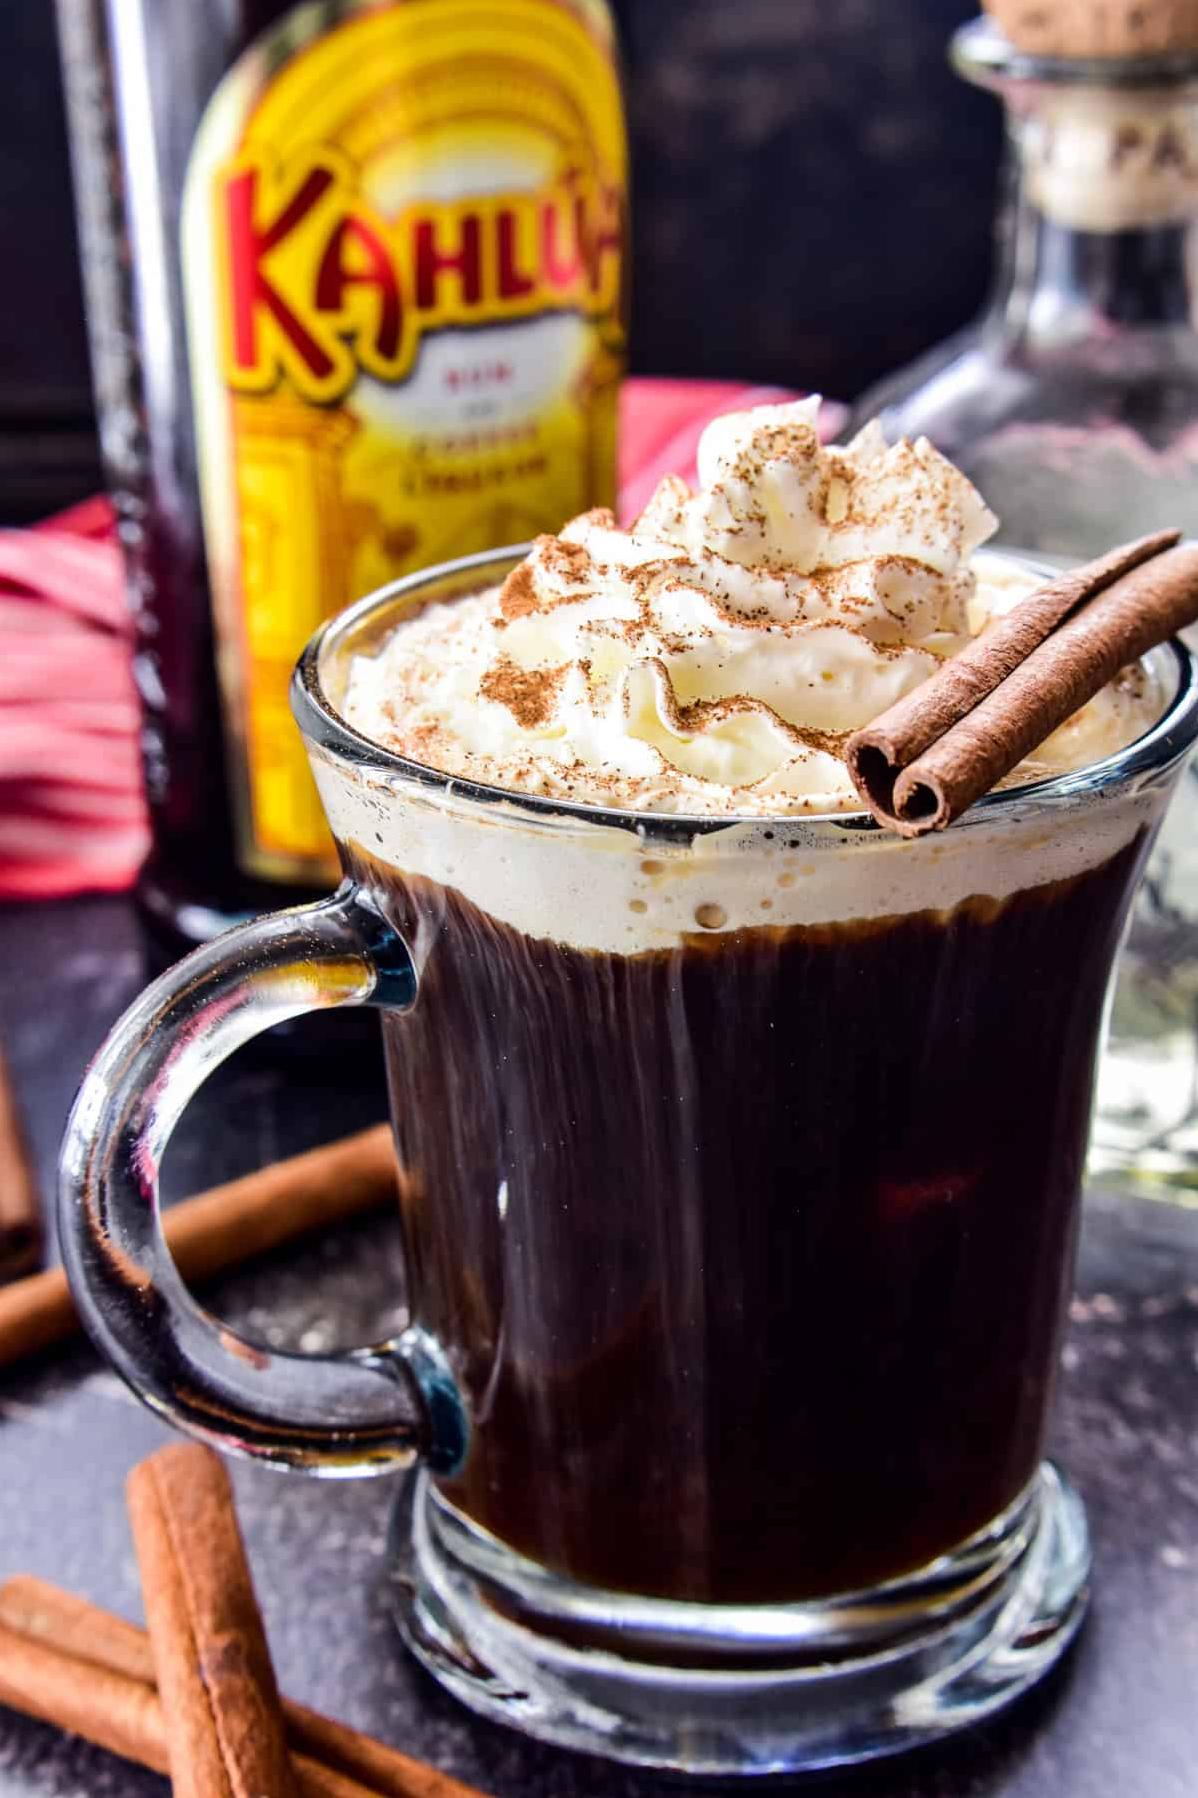  Who needs a boring iced coffee when you can have a Mexican Coffee Chillata with a kick?